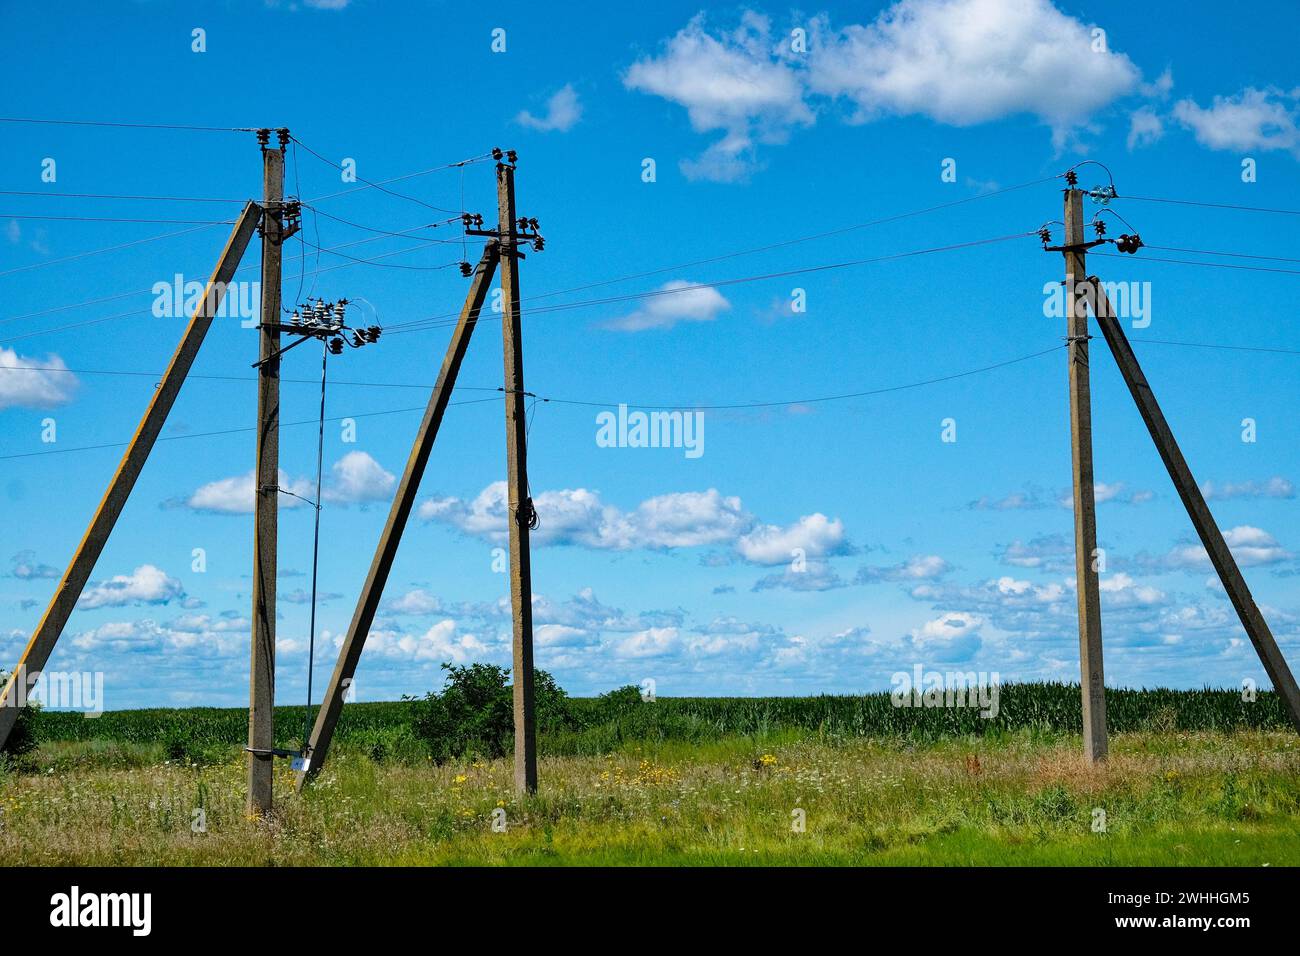 Utility poles stand in a grassy field, wires connected, under a partly cloudy sky. Stock Photo